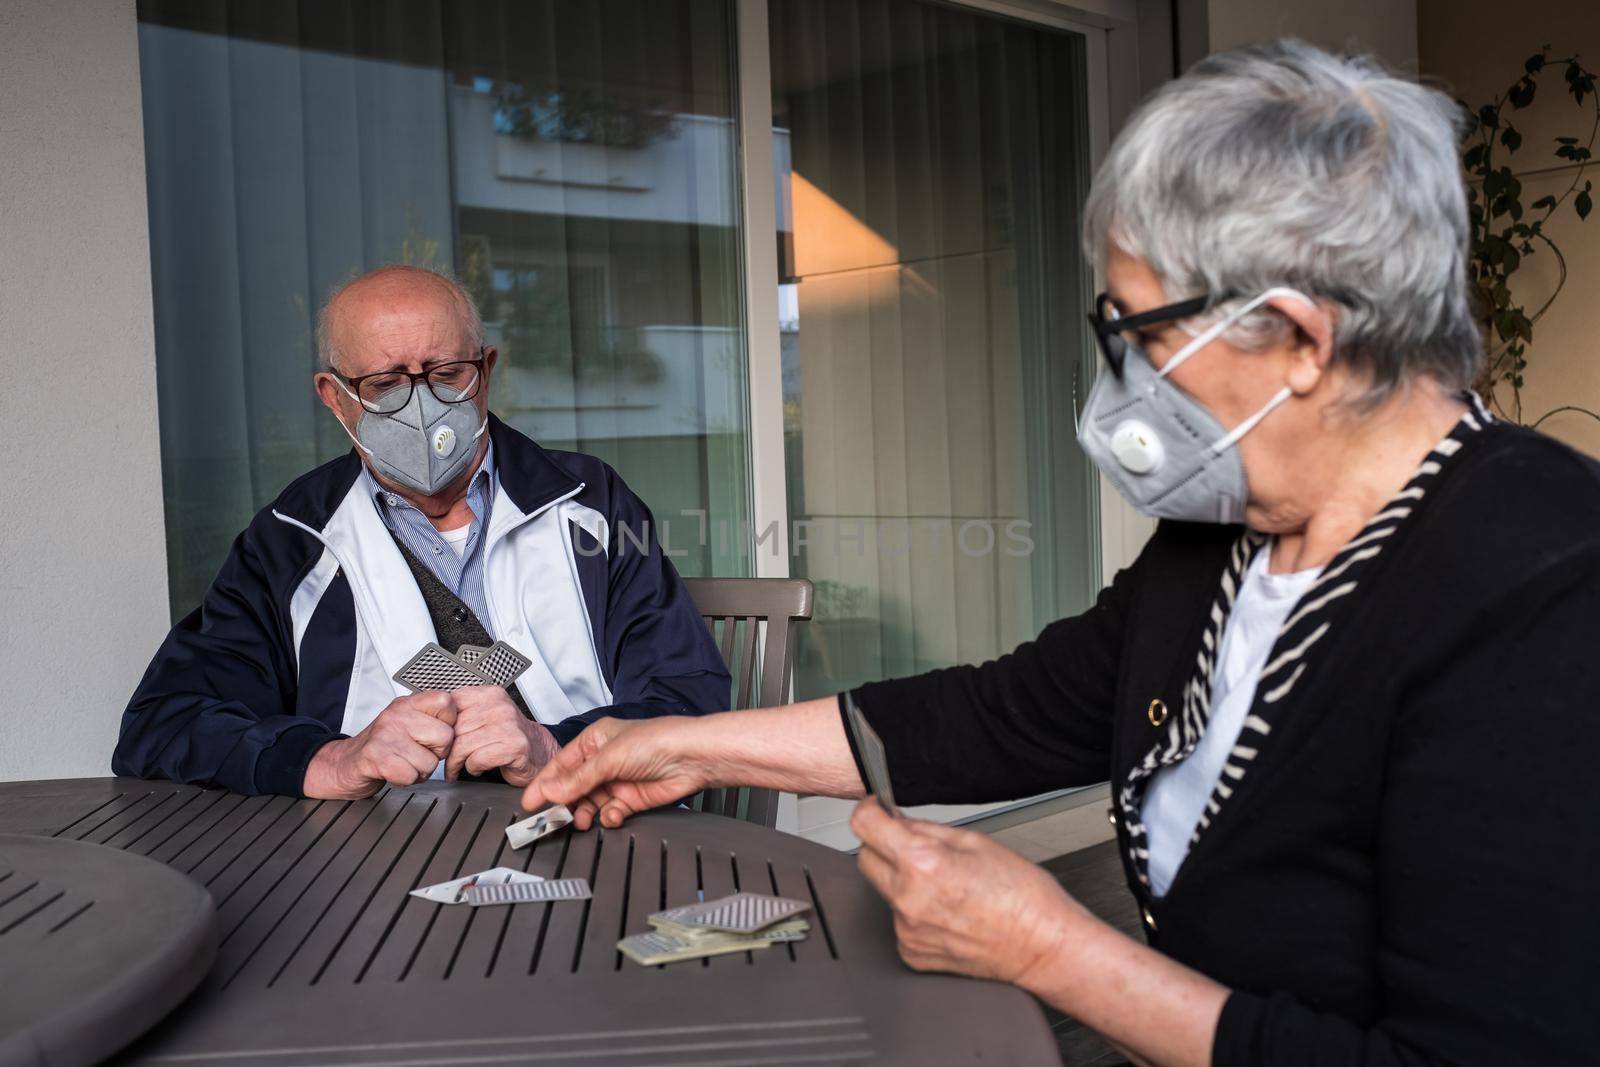 Italian's older people lockdown: a married couple play with game of the cards to combat the boredom of having to stay at home. Senior adults are the group of people at higher risk for the coronavirus COVID-19.